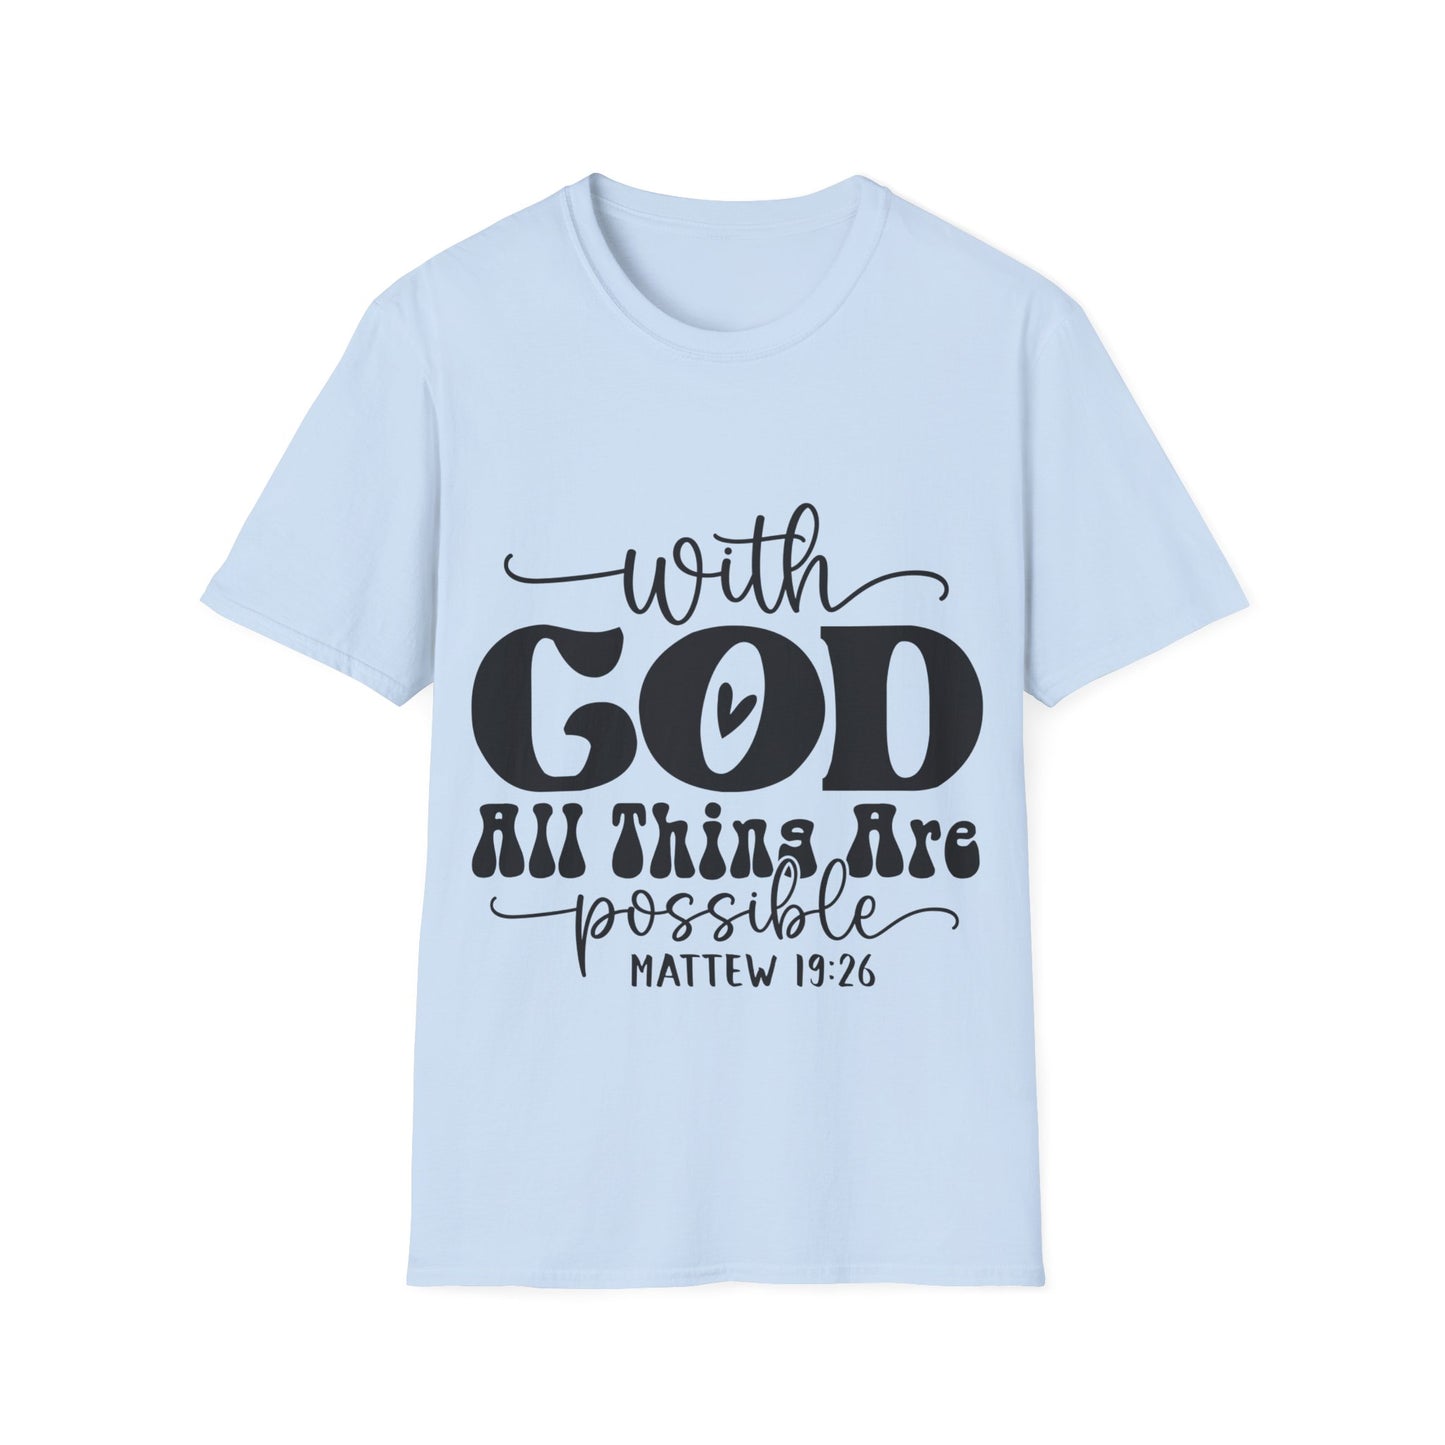 With God All Thing Are Possible Matter 19:26 (2) Triple Viking T-Shirt